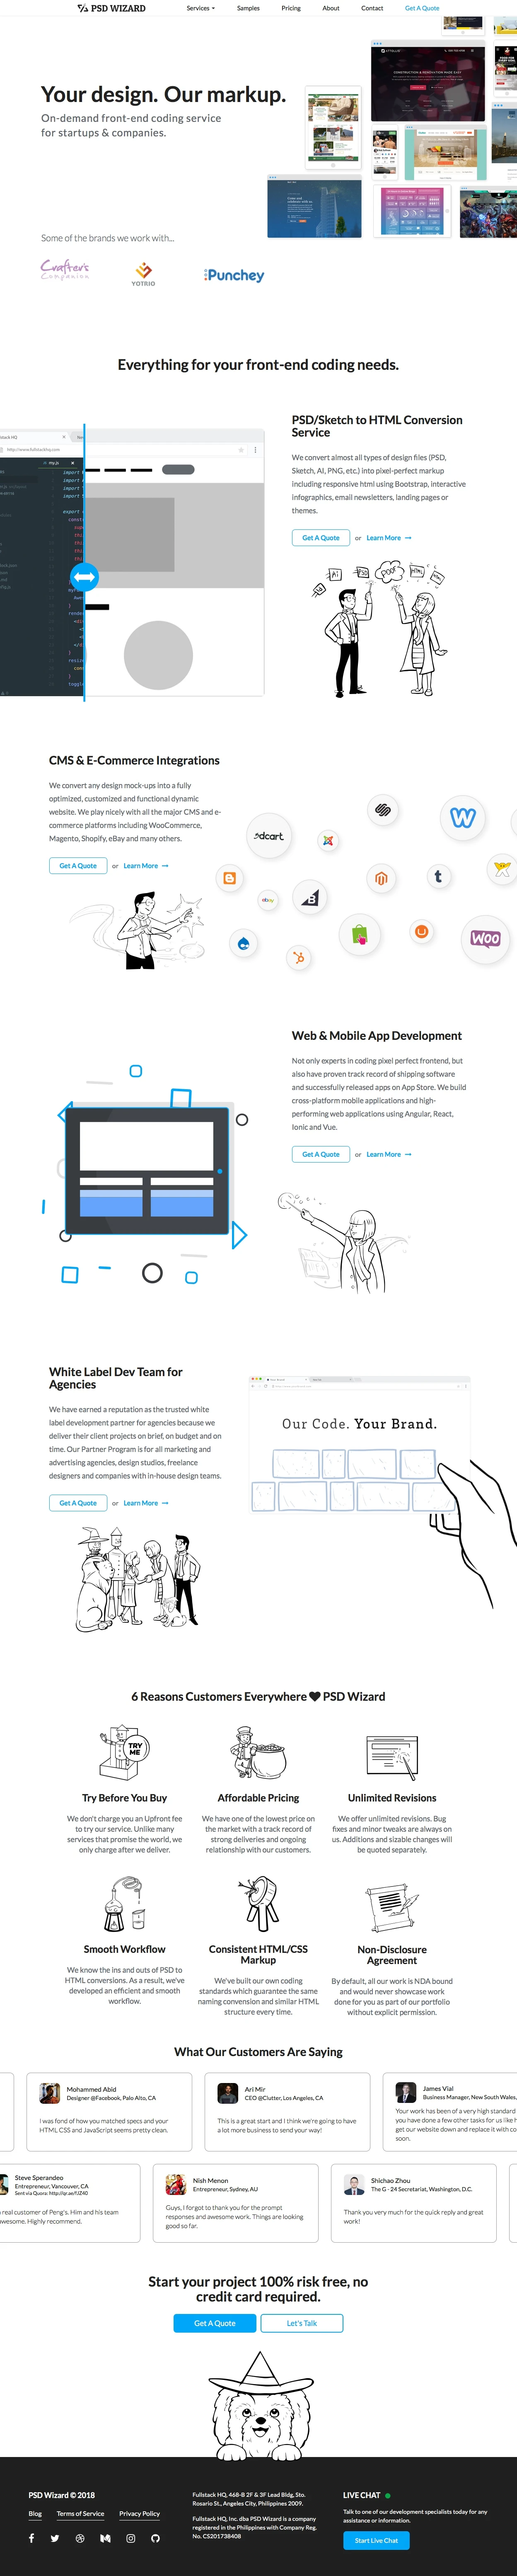 PSD Wizard Landing Page Example: On-demand front-end coding service for startups & companies.